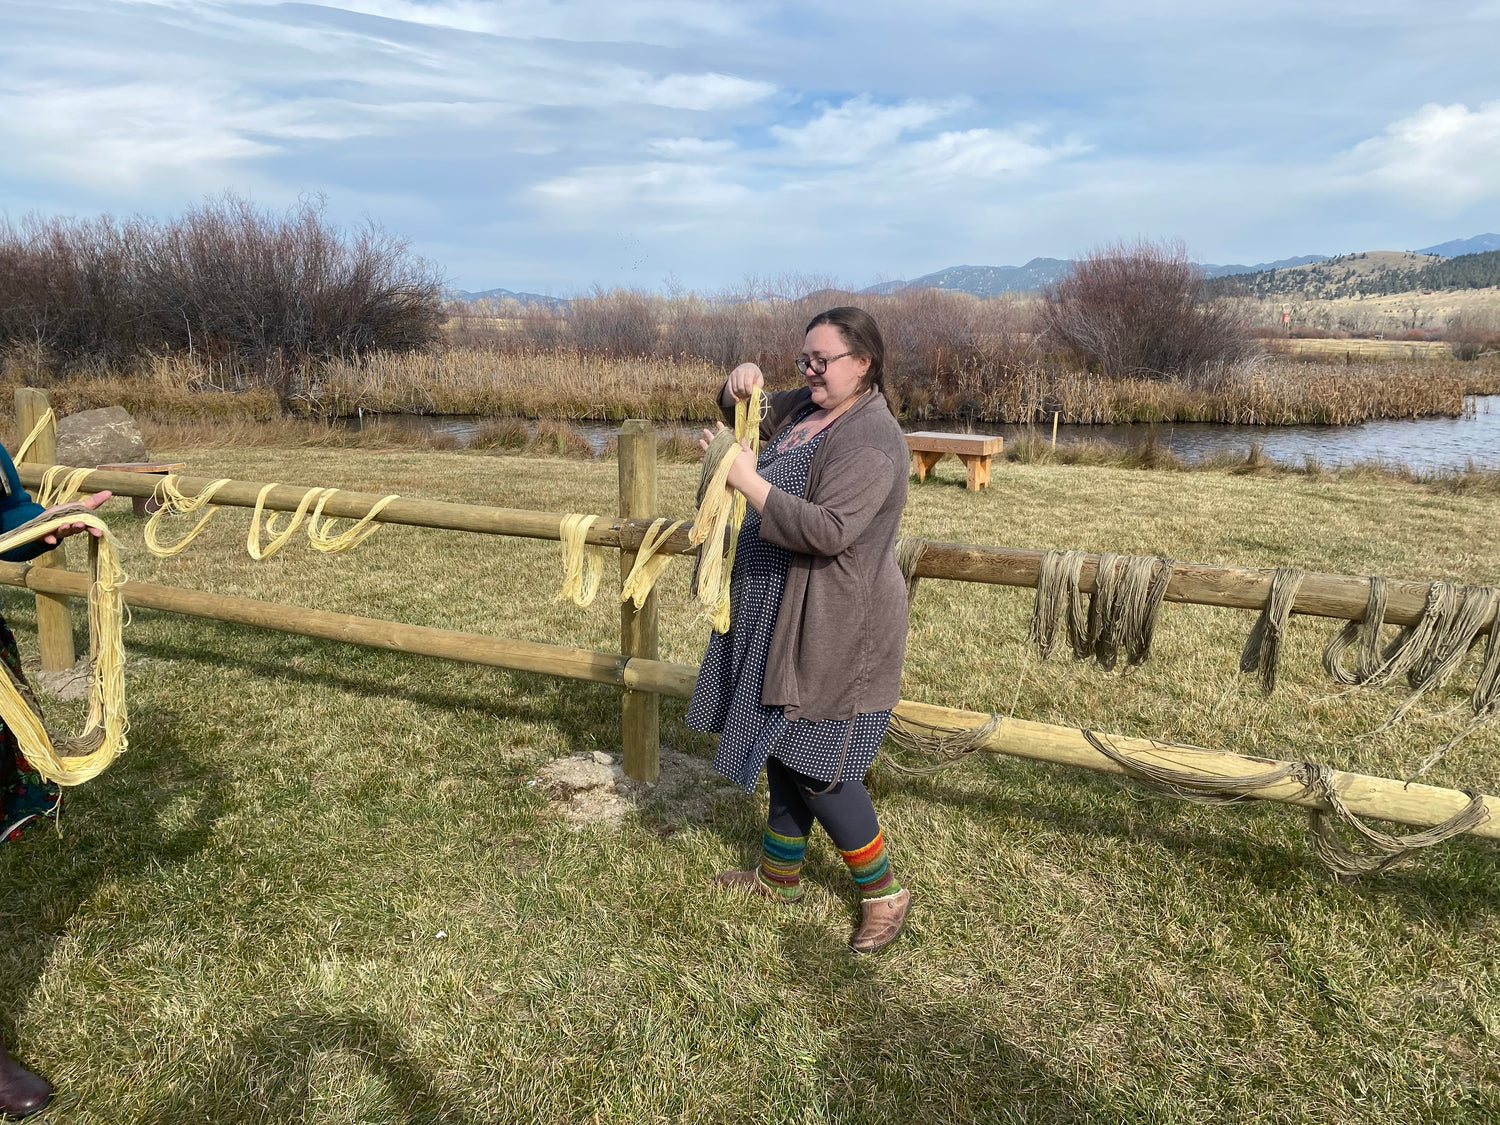 Madeline, a fat pale woman wearing a black dress and brown cardigan over black leggings with bright rainbow hand knit socks, is holding loops of onion skin dyed yarns in green and yellow in front of her as she prepares to hang them on the wooden fence behind her to dry.  The fence already has many skeins in matching colors hanging and blowing in the wind.  The background is a small pond surrounded by shrubs, the mountains of Montana are in the distance.